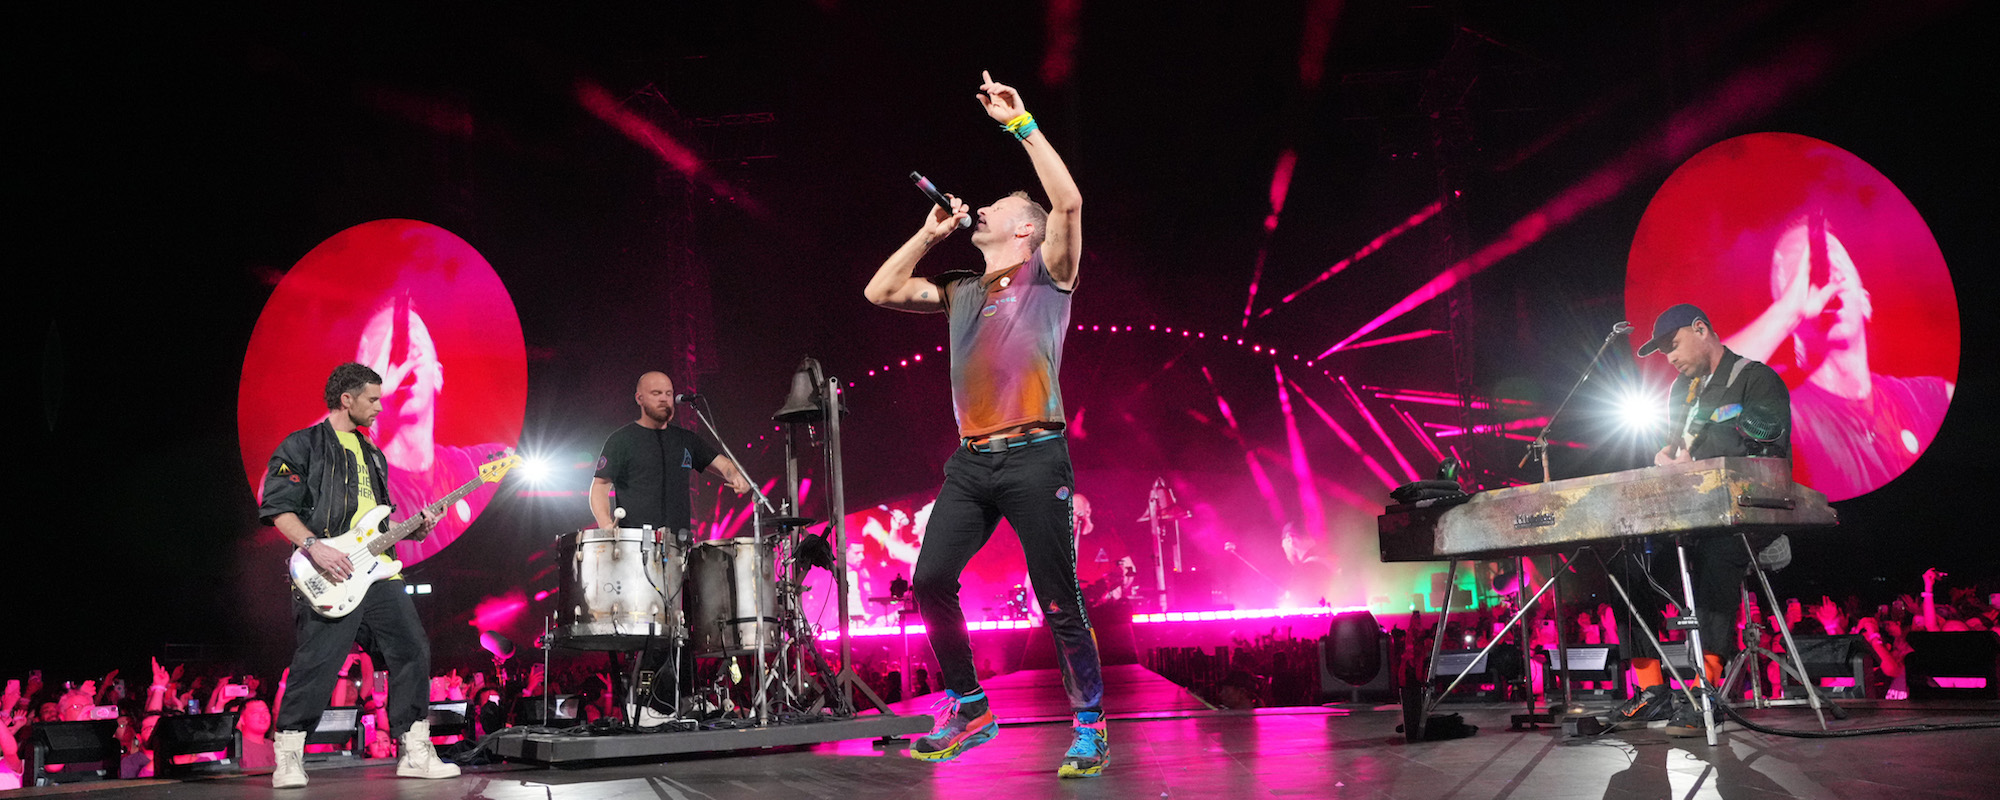 Coldplay Working on New Album ‘Moon Music’